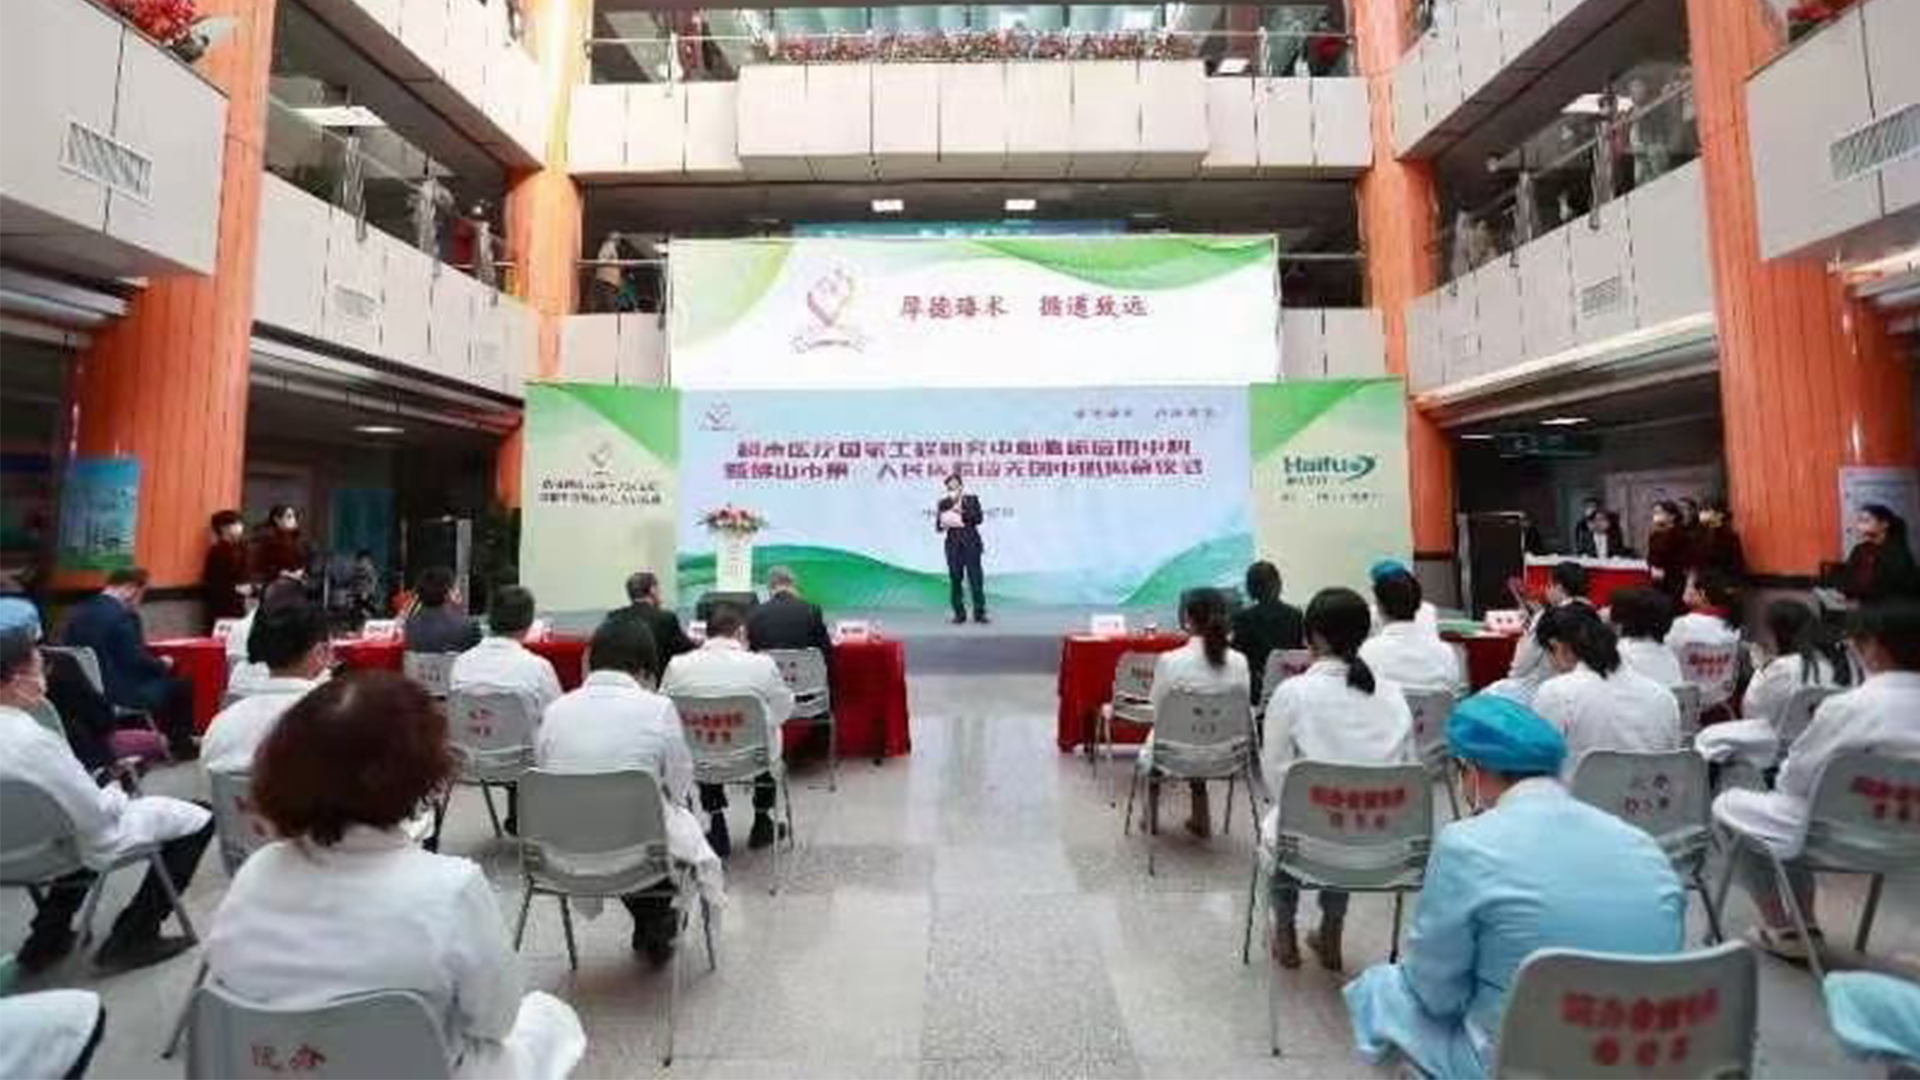 The Grand Opening Event of The Uterine Medical center in Guangzhou Foshan_3